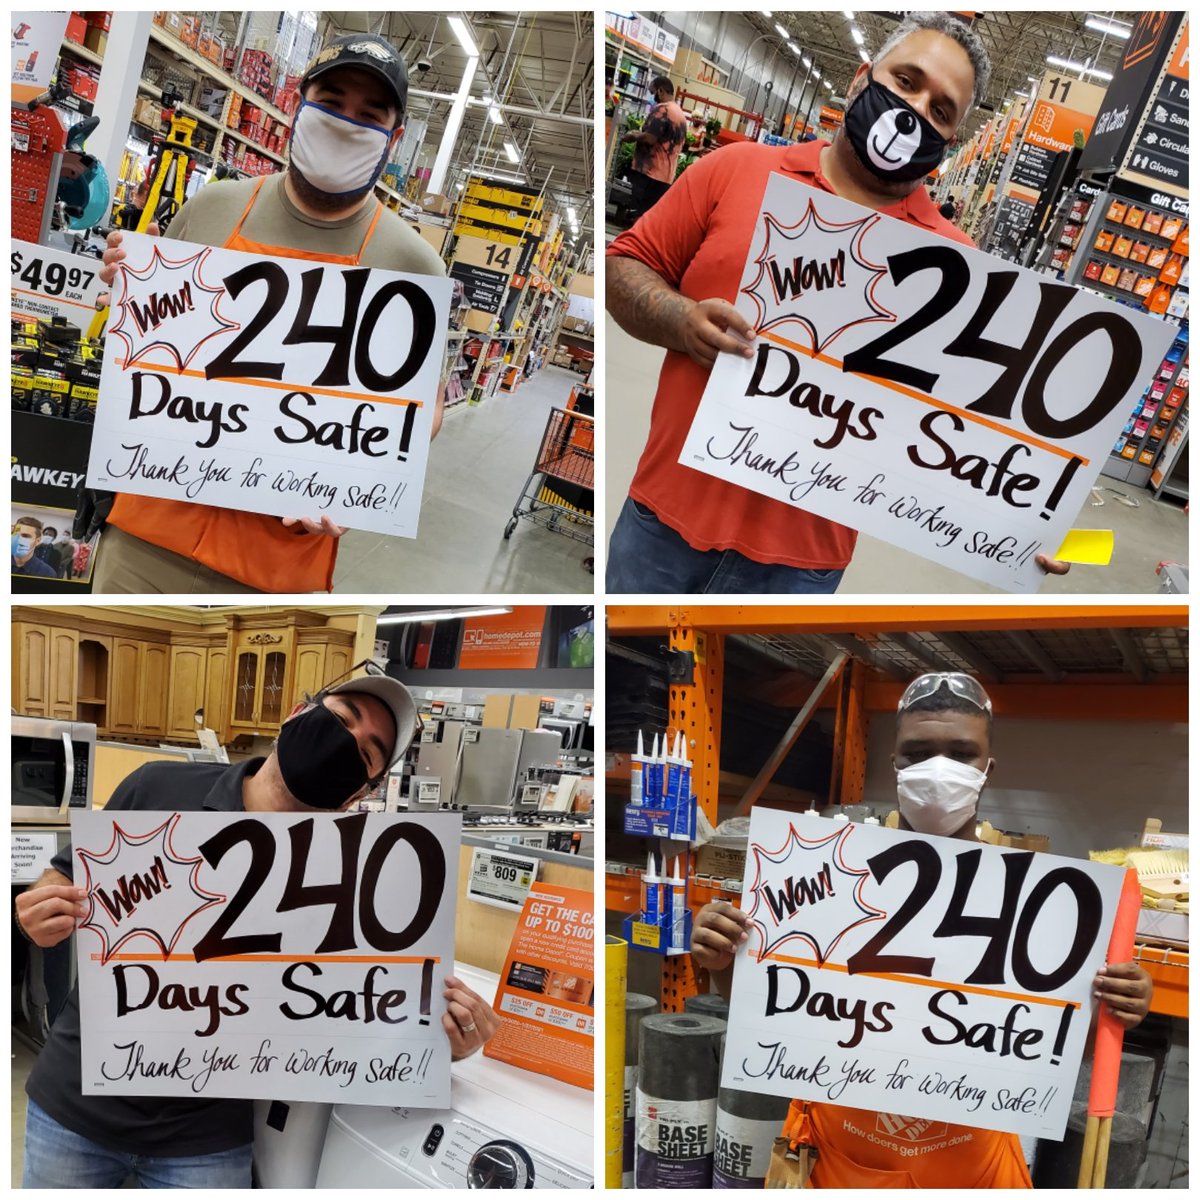 Say whaaaaaat!!! We reached 240 Days Safe at 4166 today!! Burritos, Hot Pockets & snacks for everyone! So proud to celebrate this awesome accomplishment with our store!!! Way to go team, let's get to that 365 Club! #SafetyIsPersonal #4166WeStandTogether #4166TheBestSouthPhillyHD